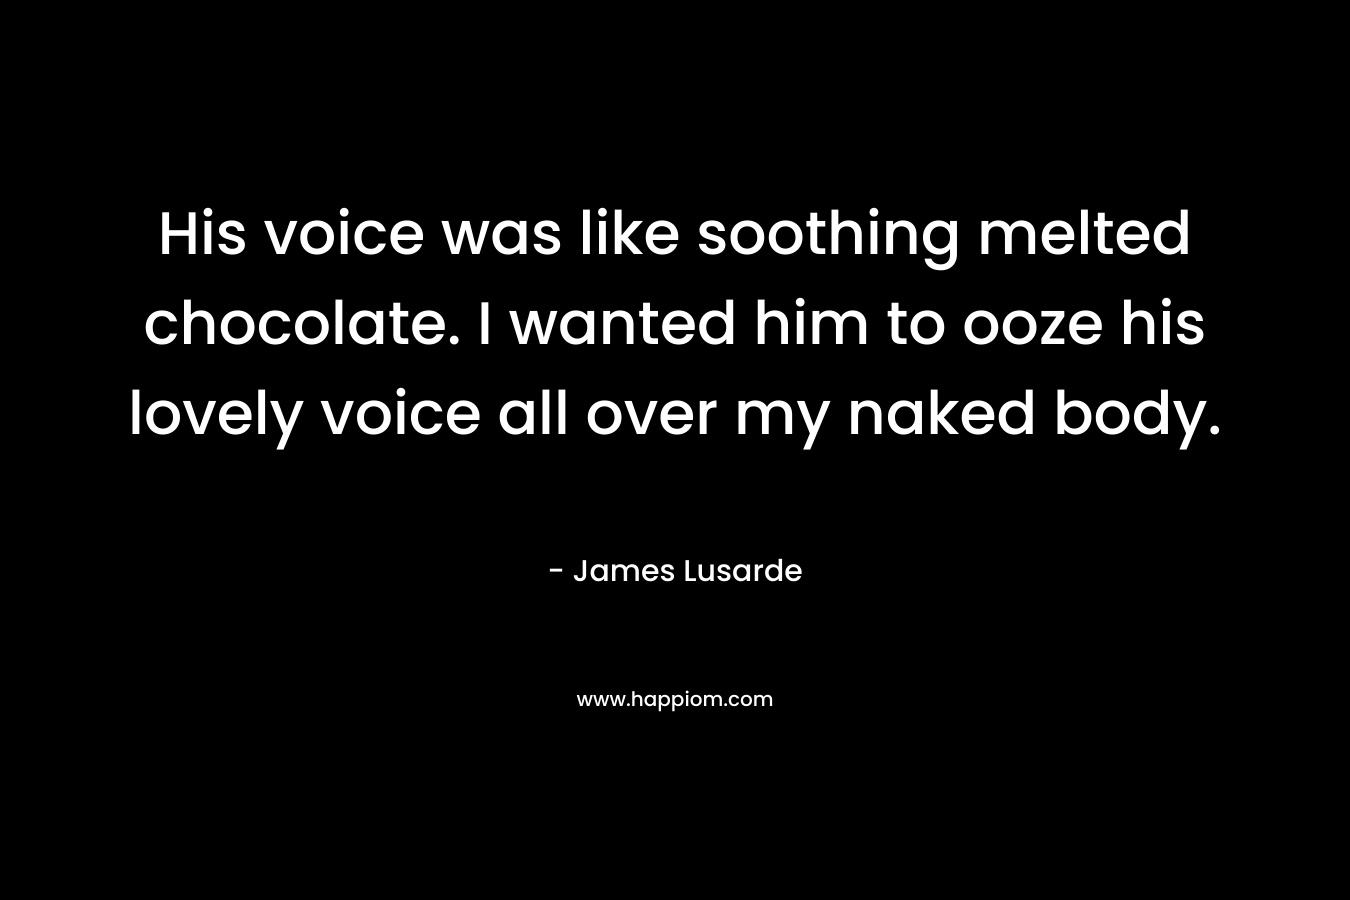 His voice was like soothing melted chocolate. I wanted him to ooze his lovely voice all over my naked body. – James Lusarde